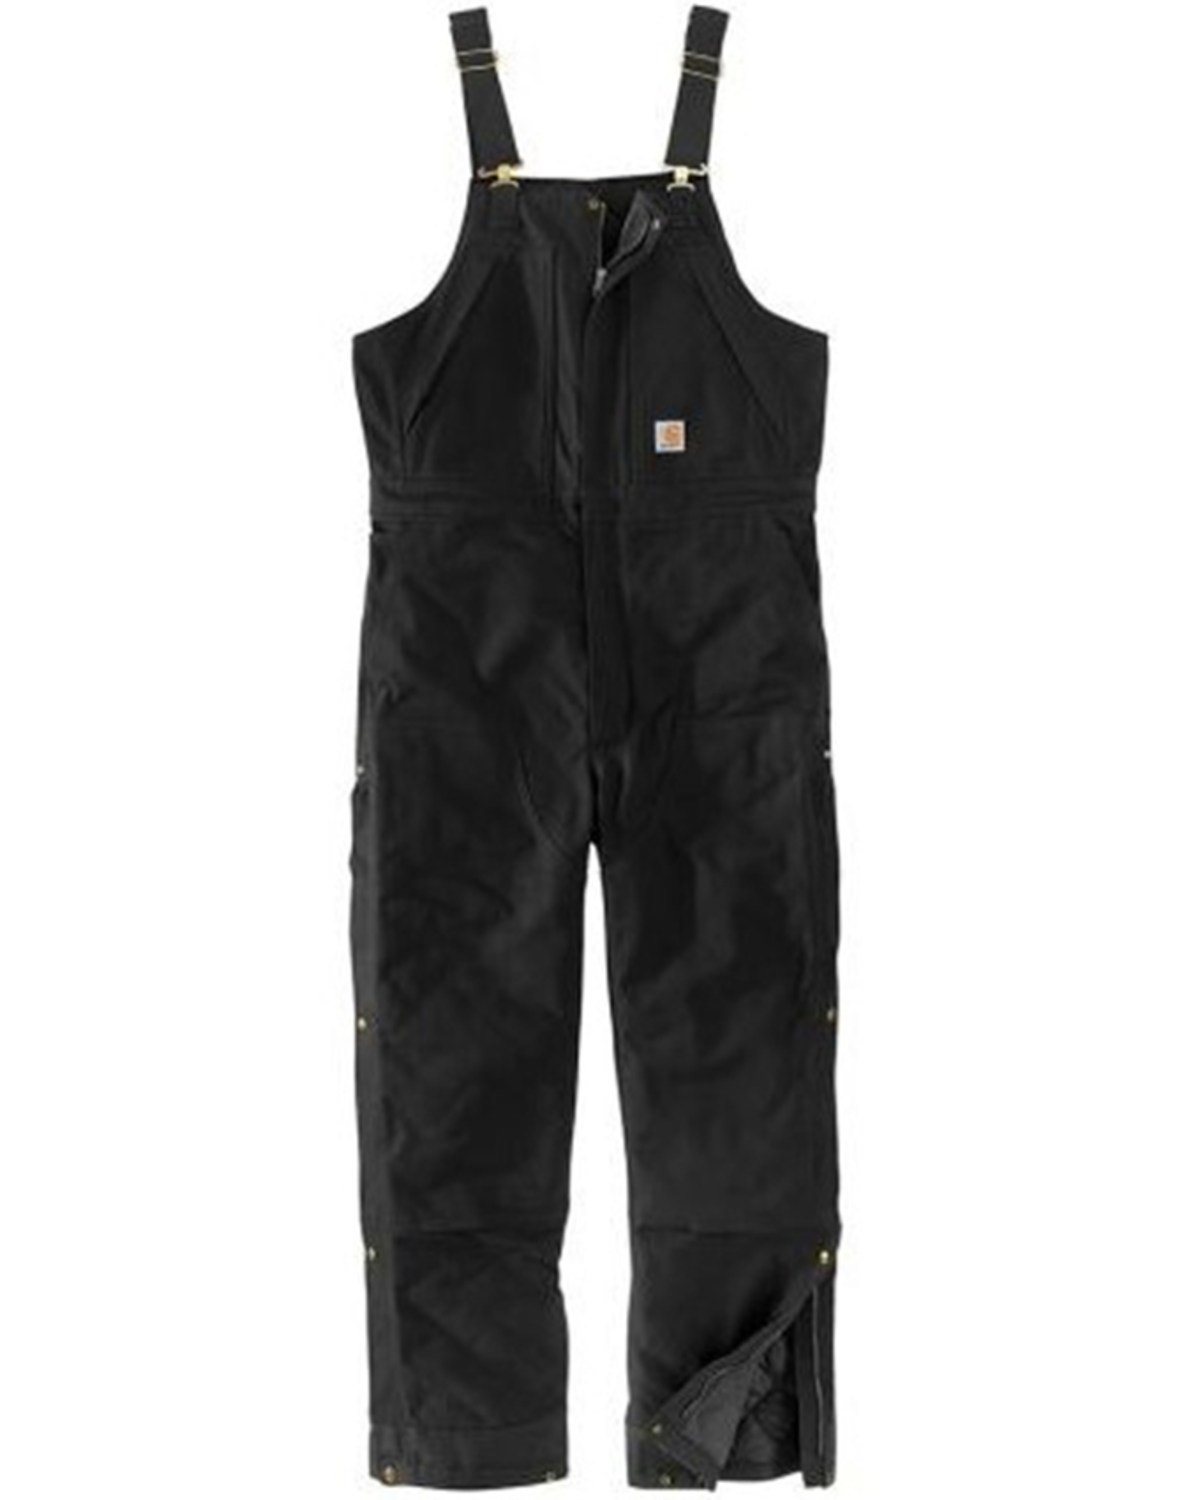 Carhartt Men's Loose Fit Firm Duck Insulated Overalls